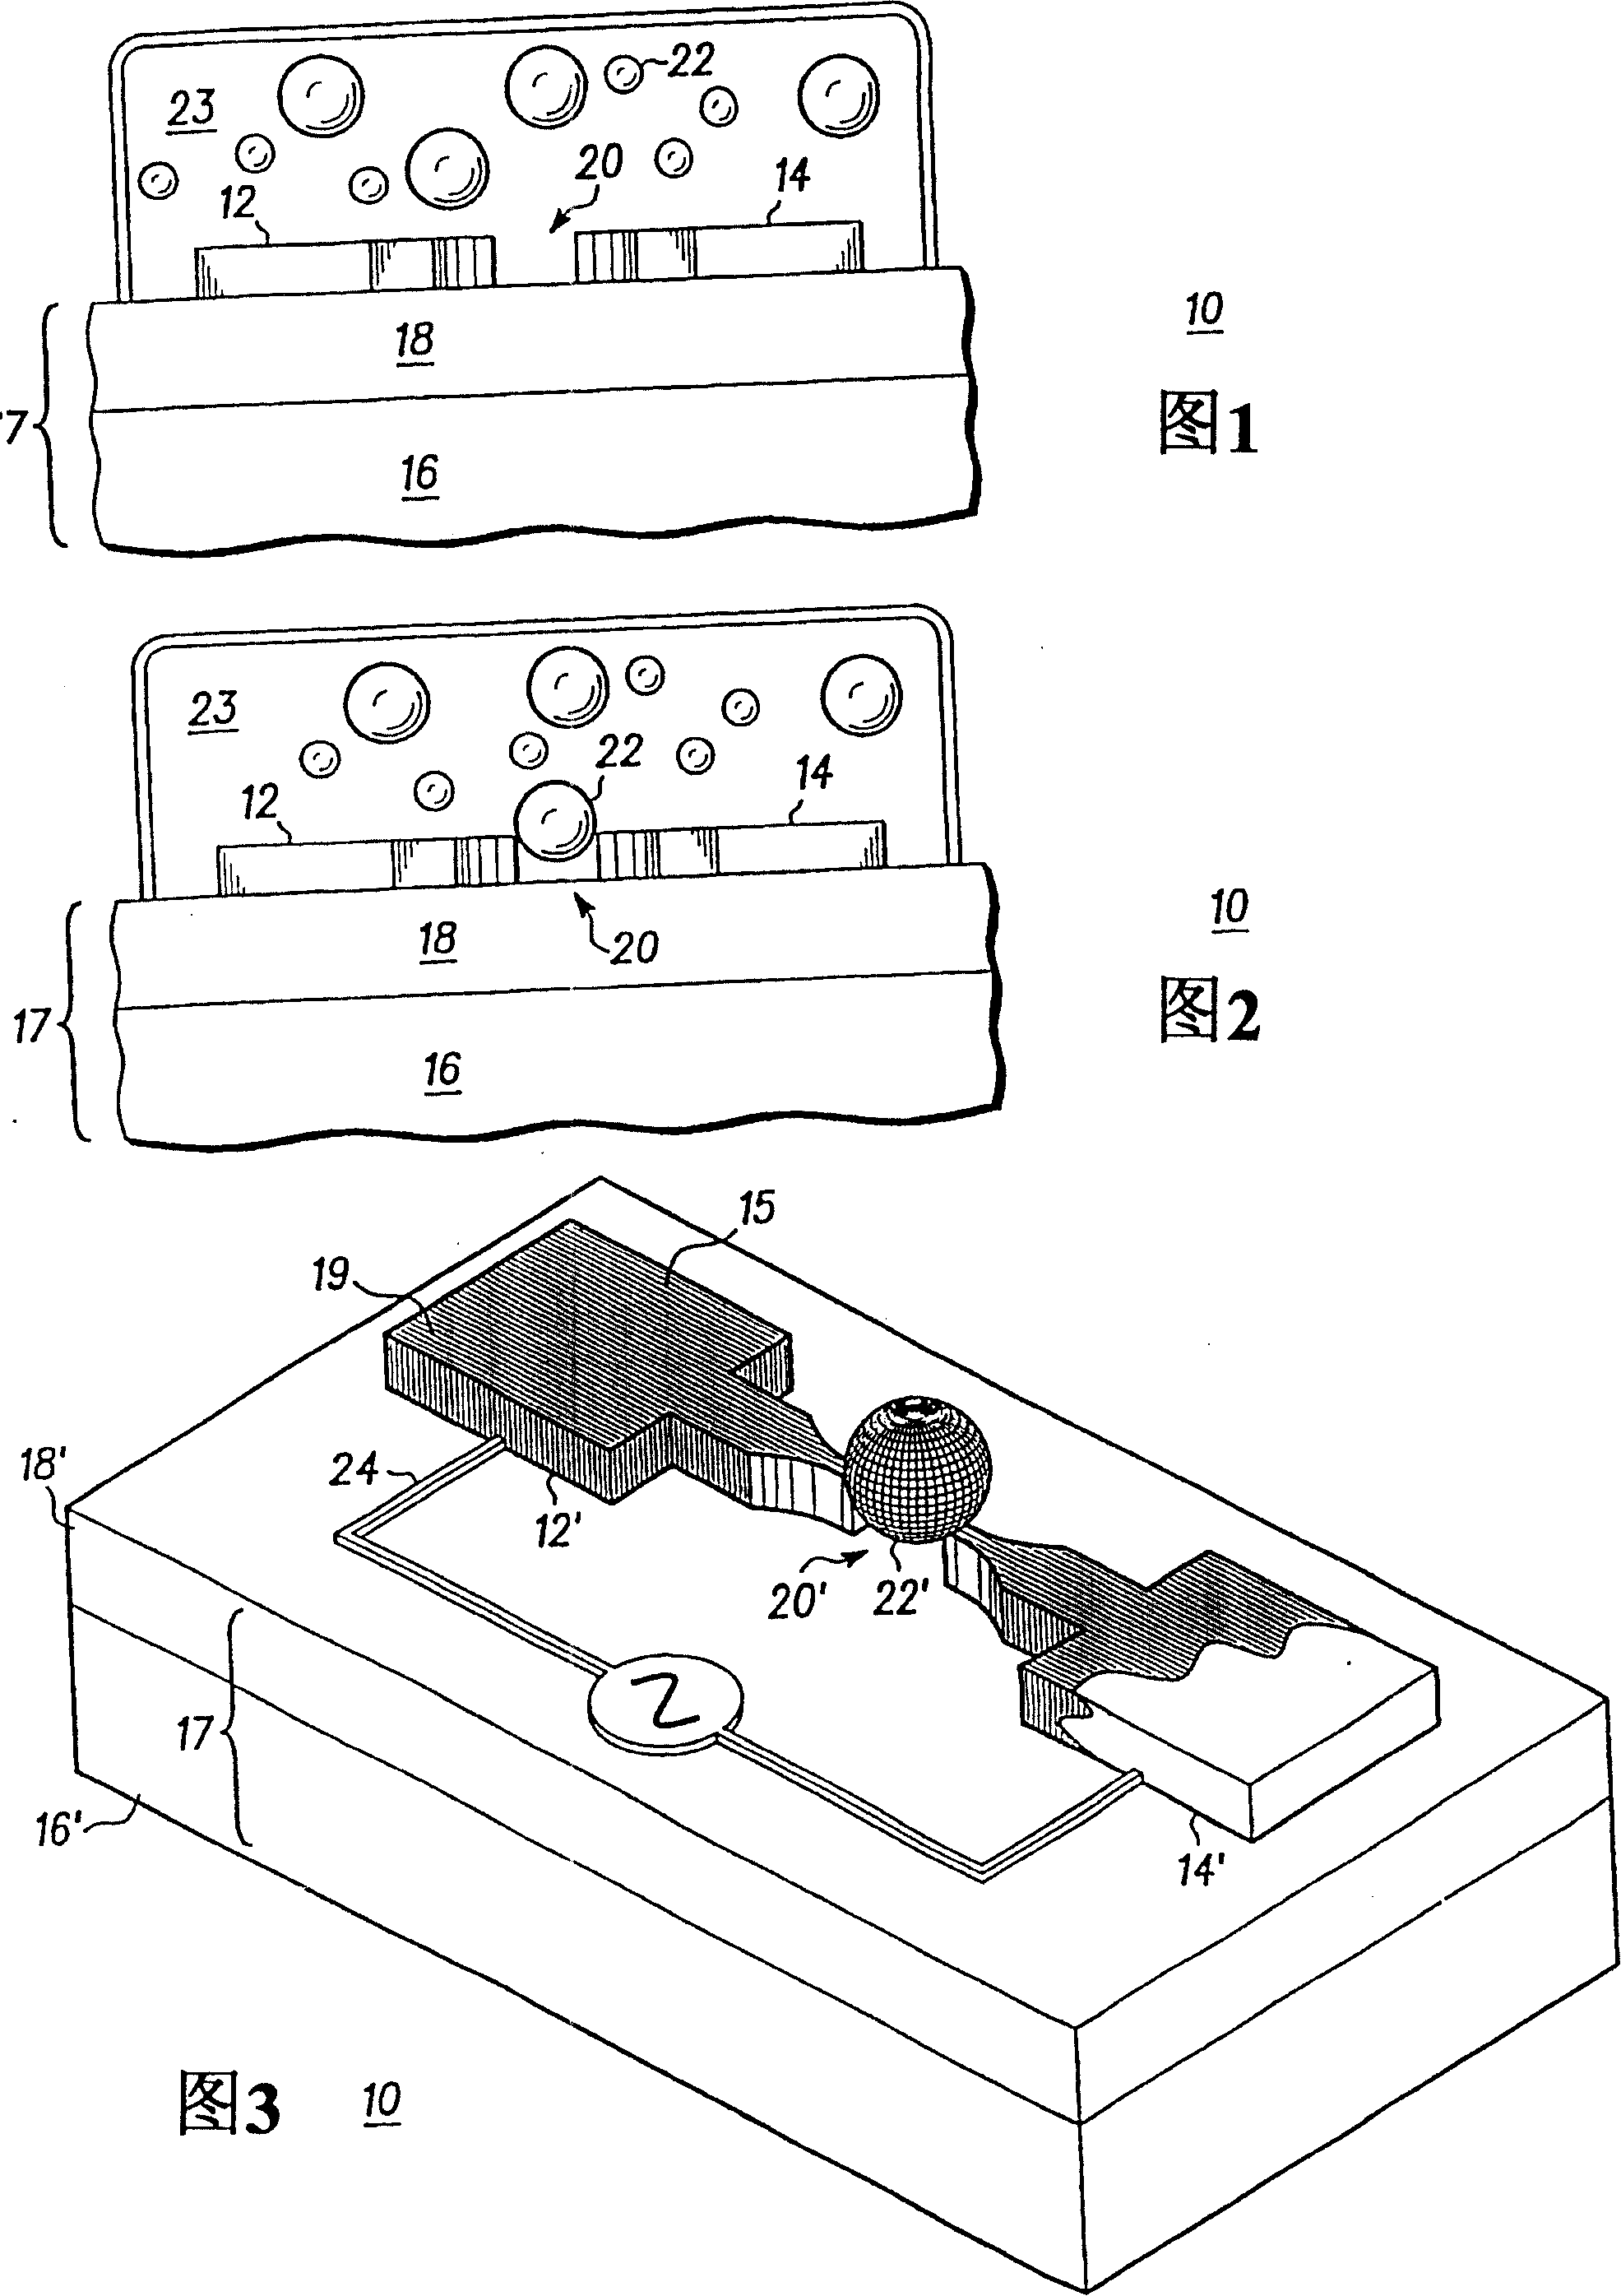 Selectively aligning nanometer-scale components using AC fields